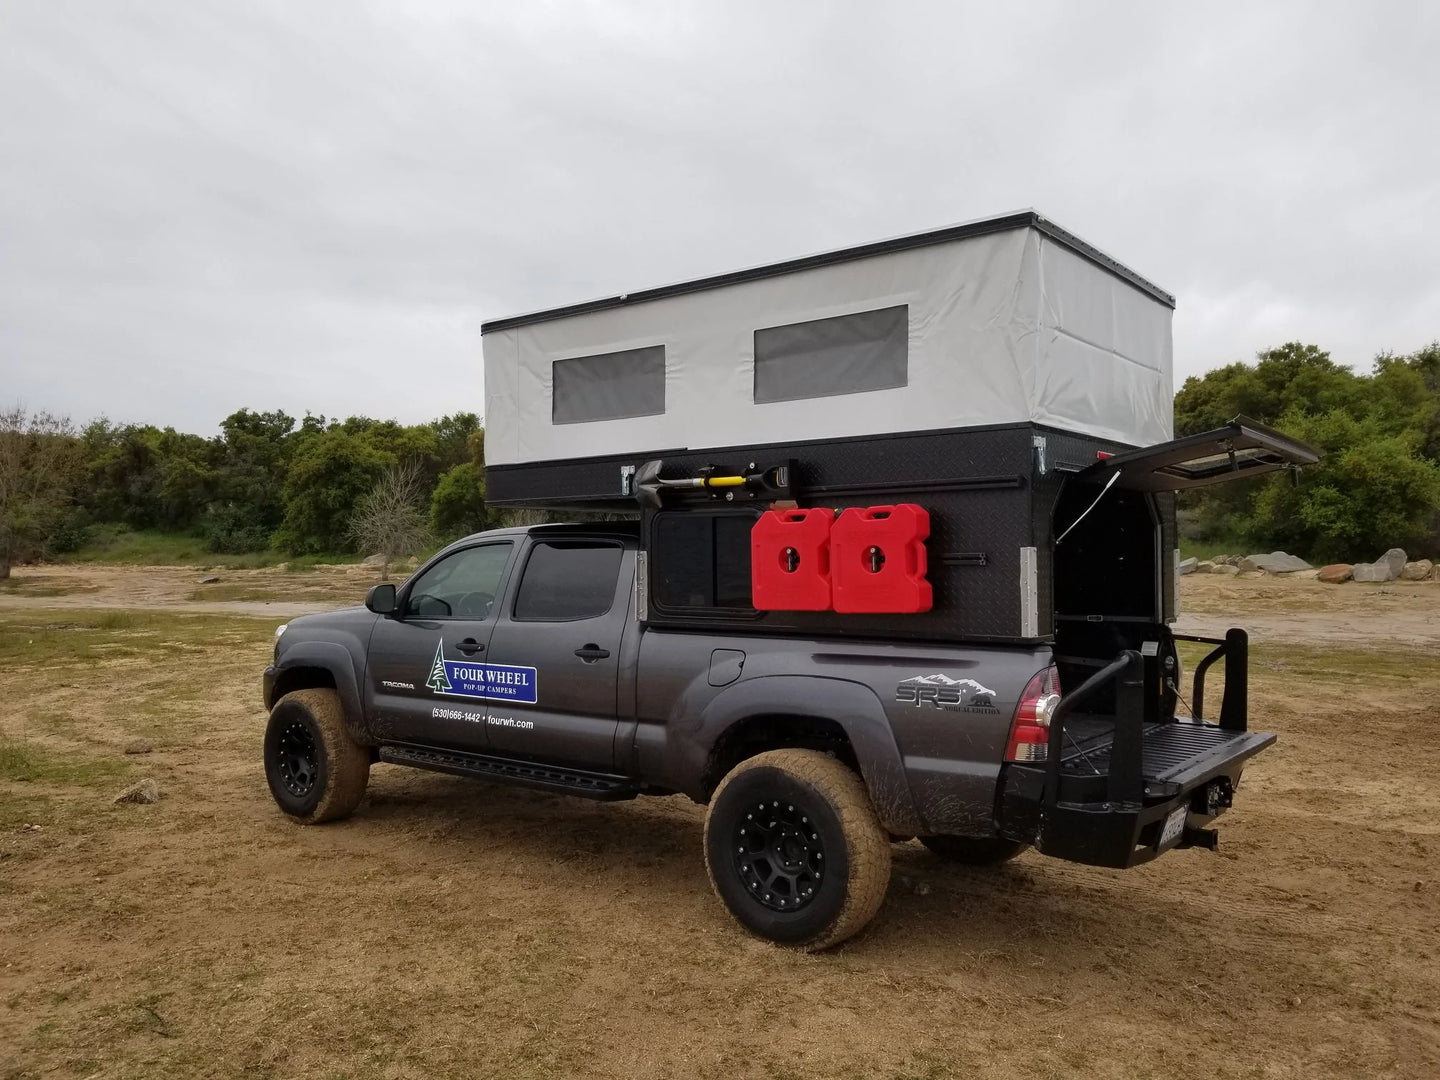 Coming in July: Mid Size Project M Four Wheel Camper